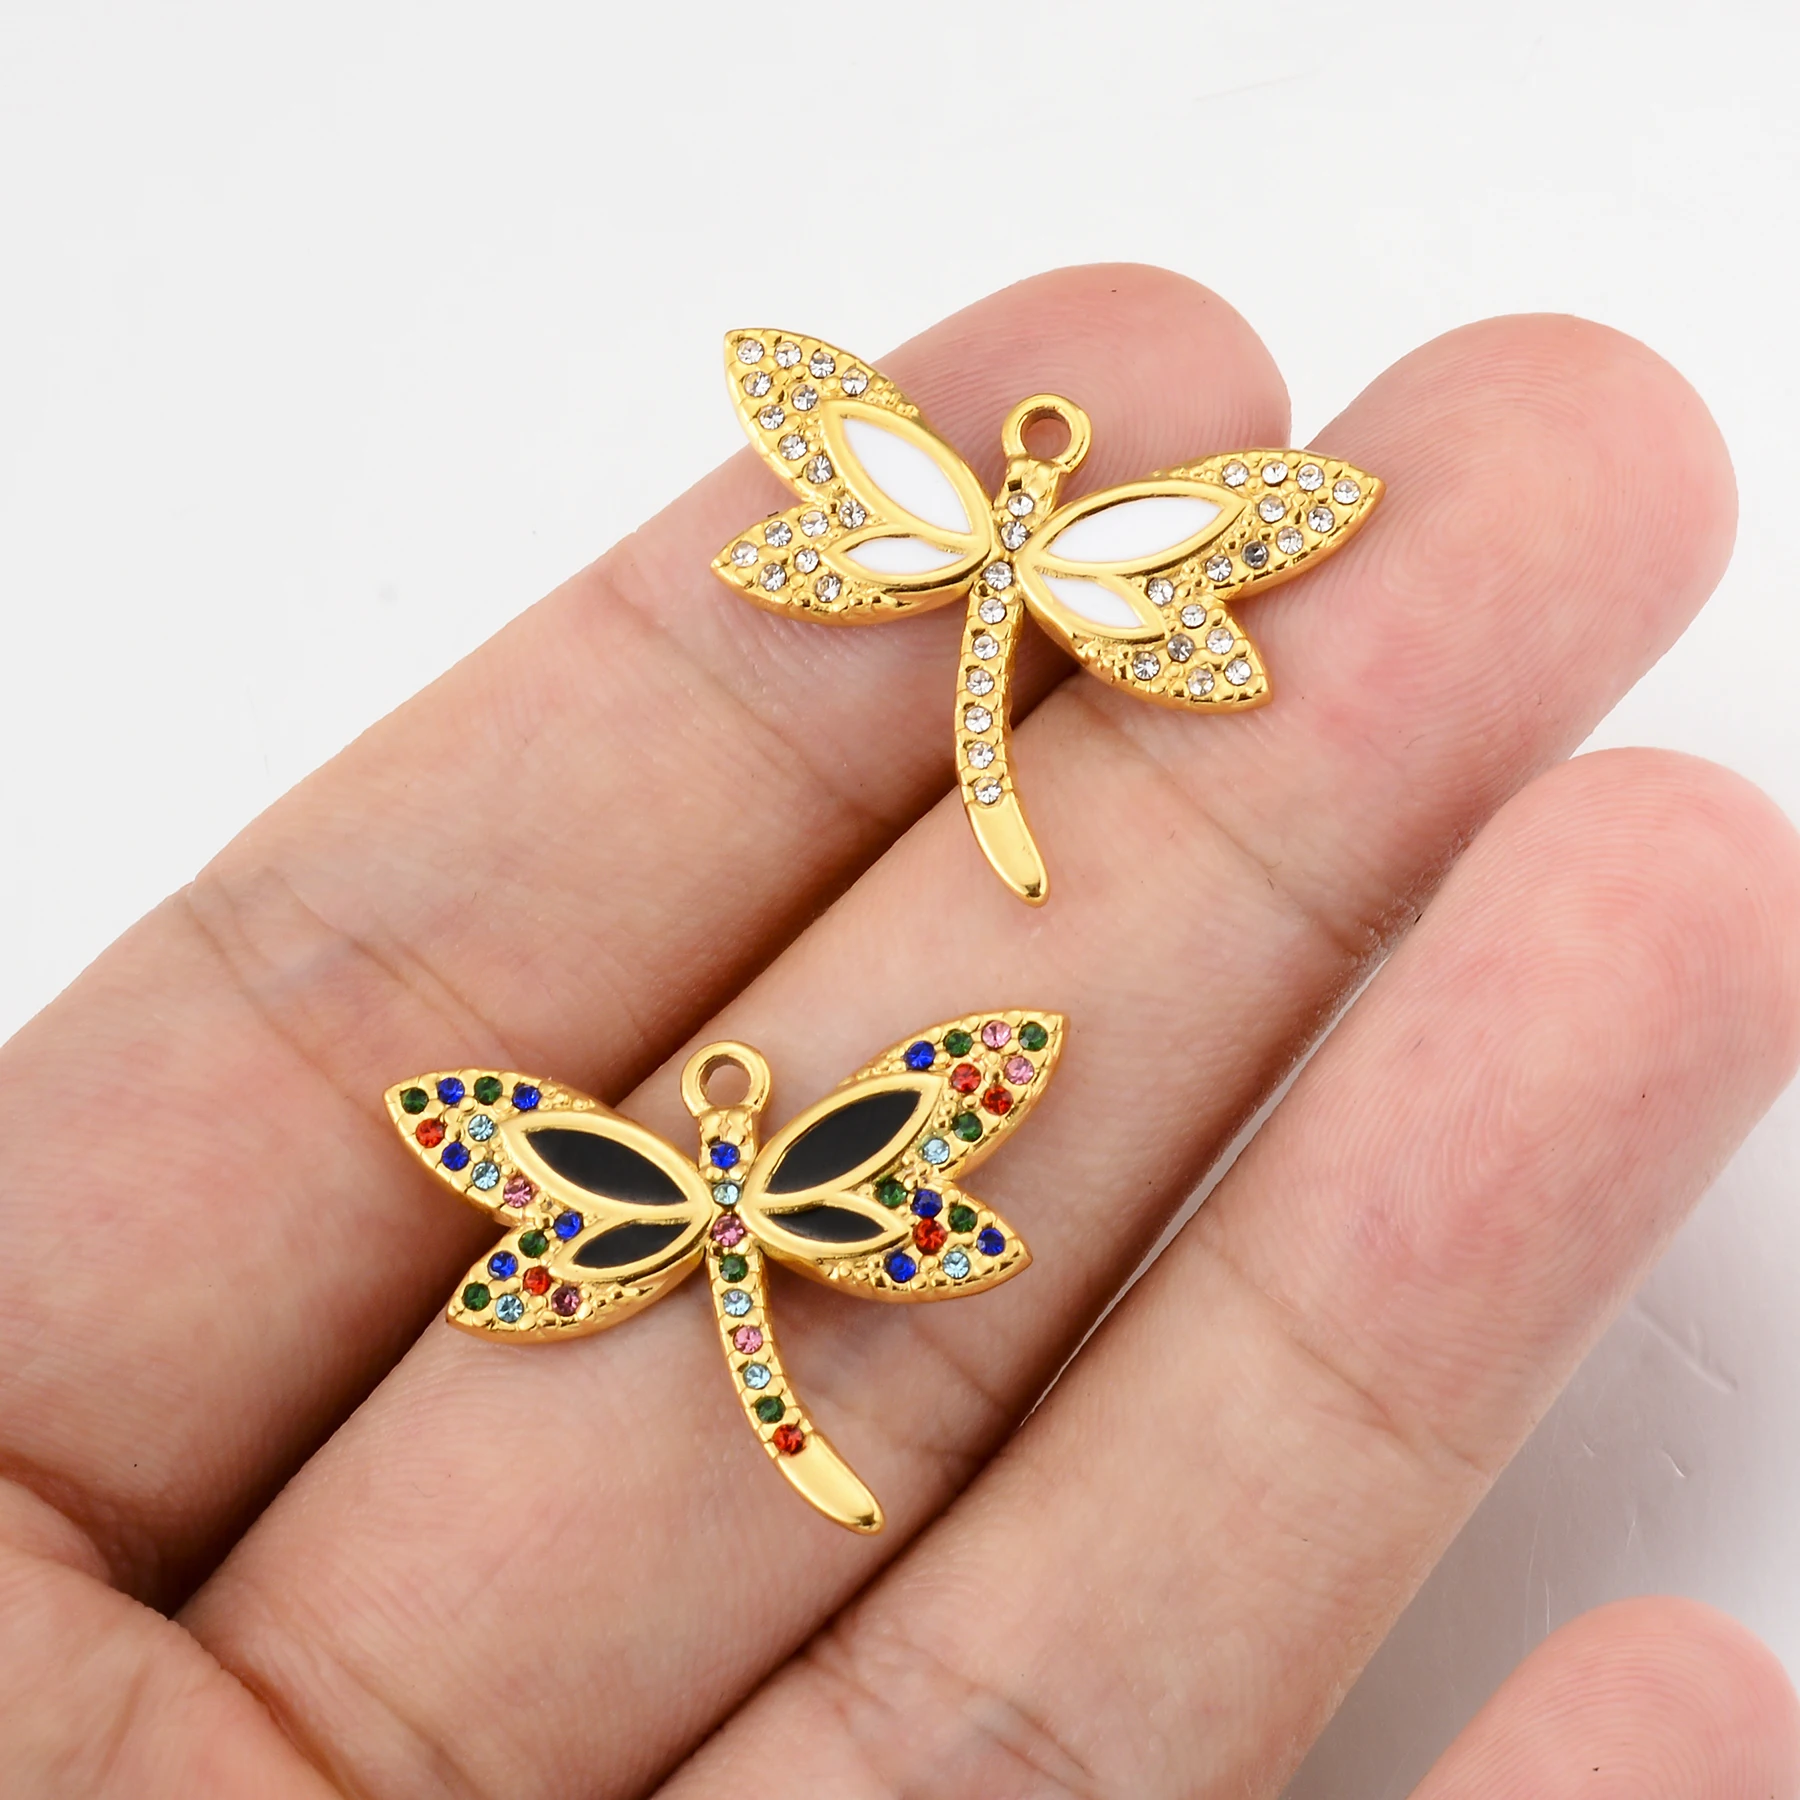 

8pcs Fashion Dragonfly Accessories for DIY Handmade Necklace Findings Enamel Insect Stainless Steel Accessories Wholesale